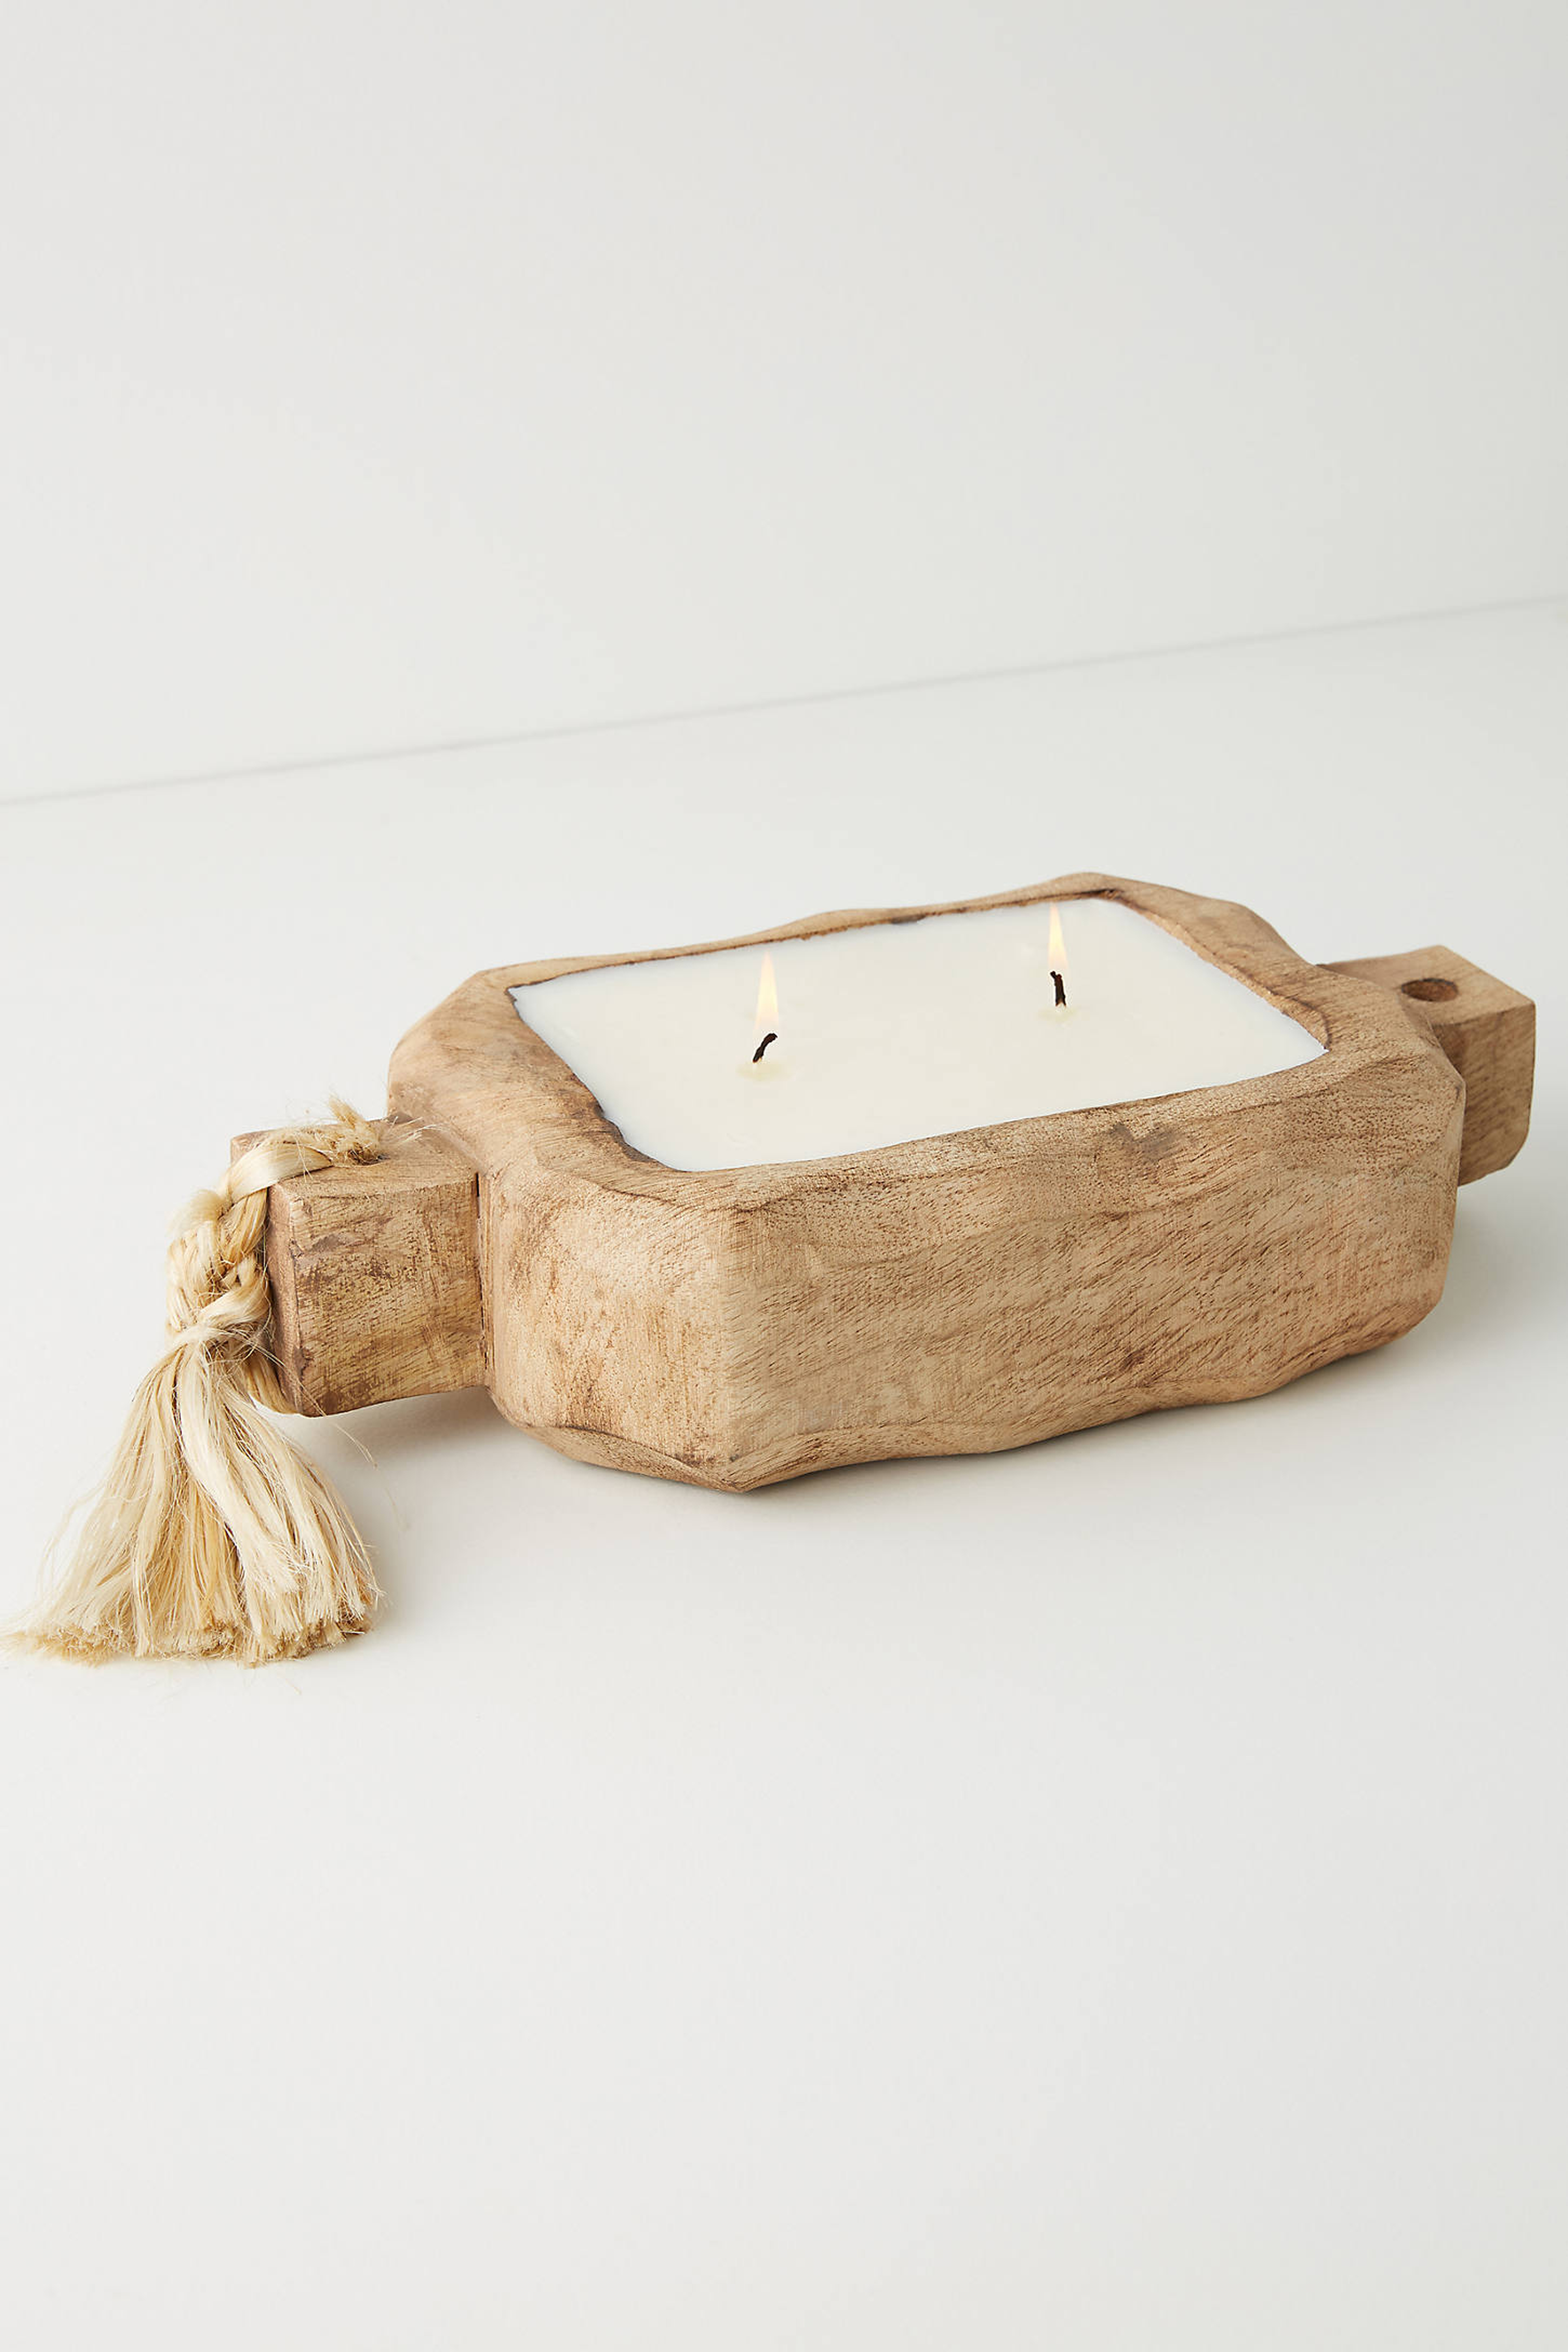 Driftwood Tray Candle - Anthropologie